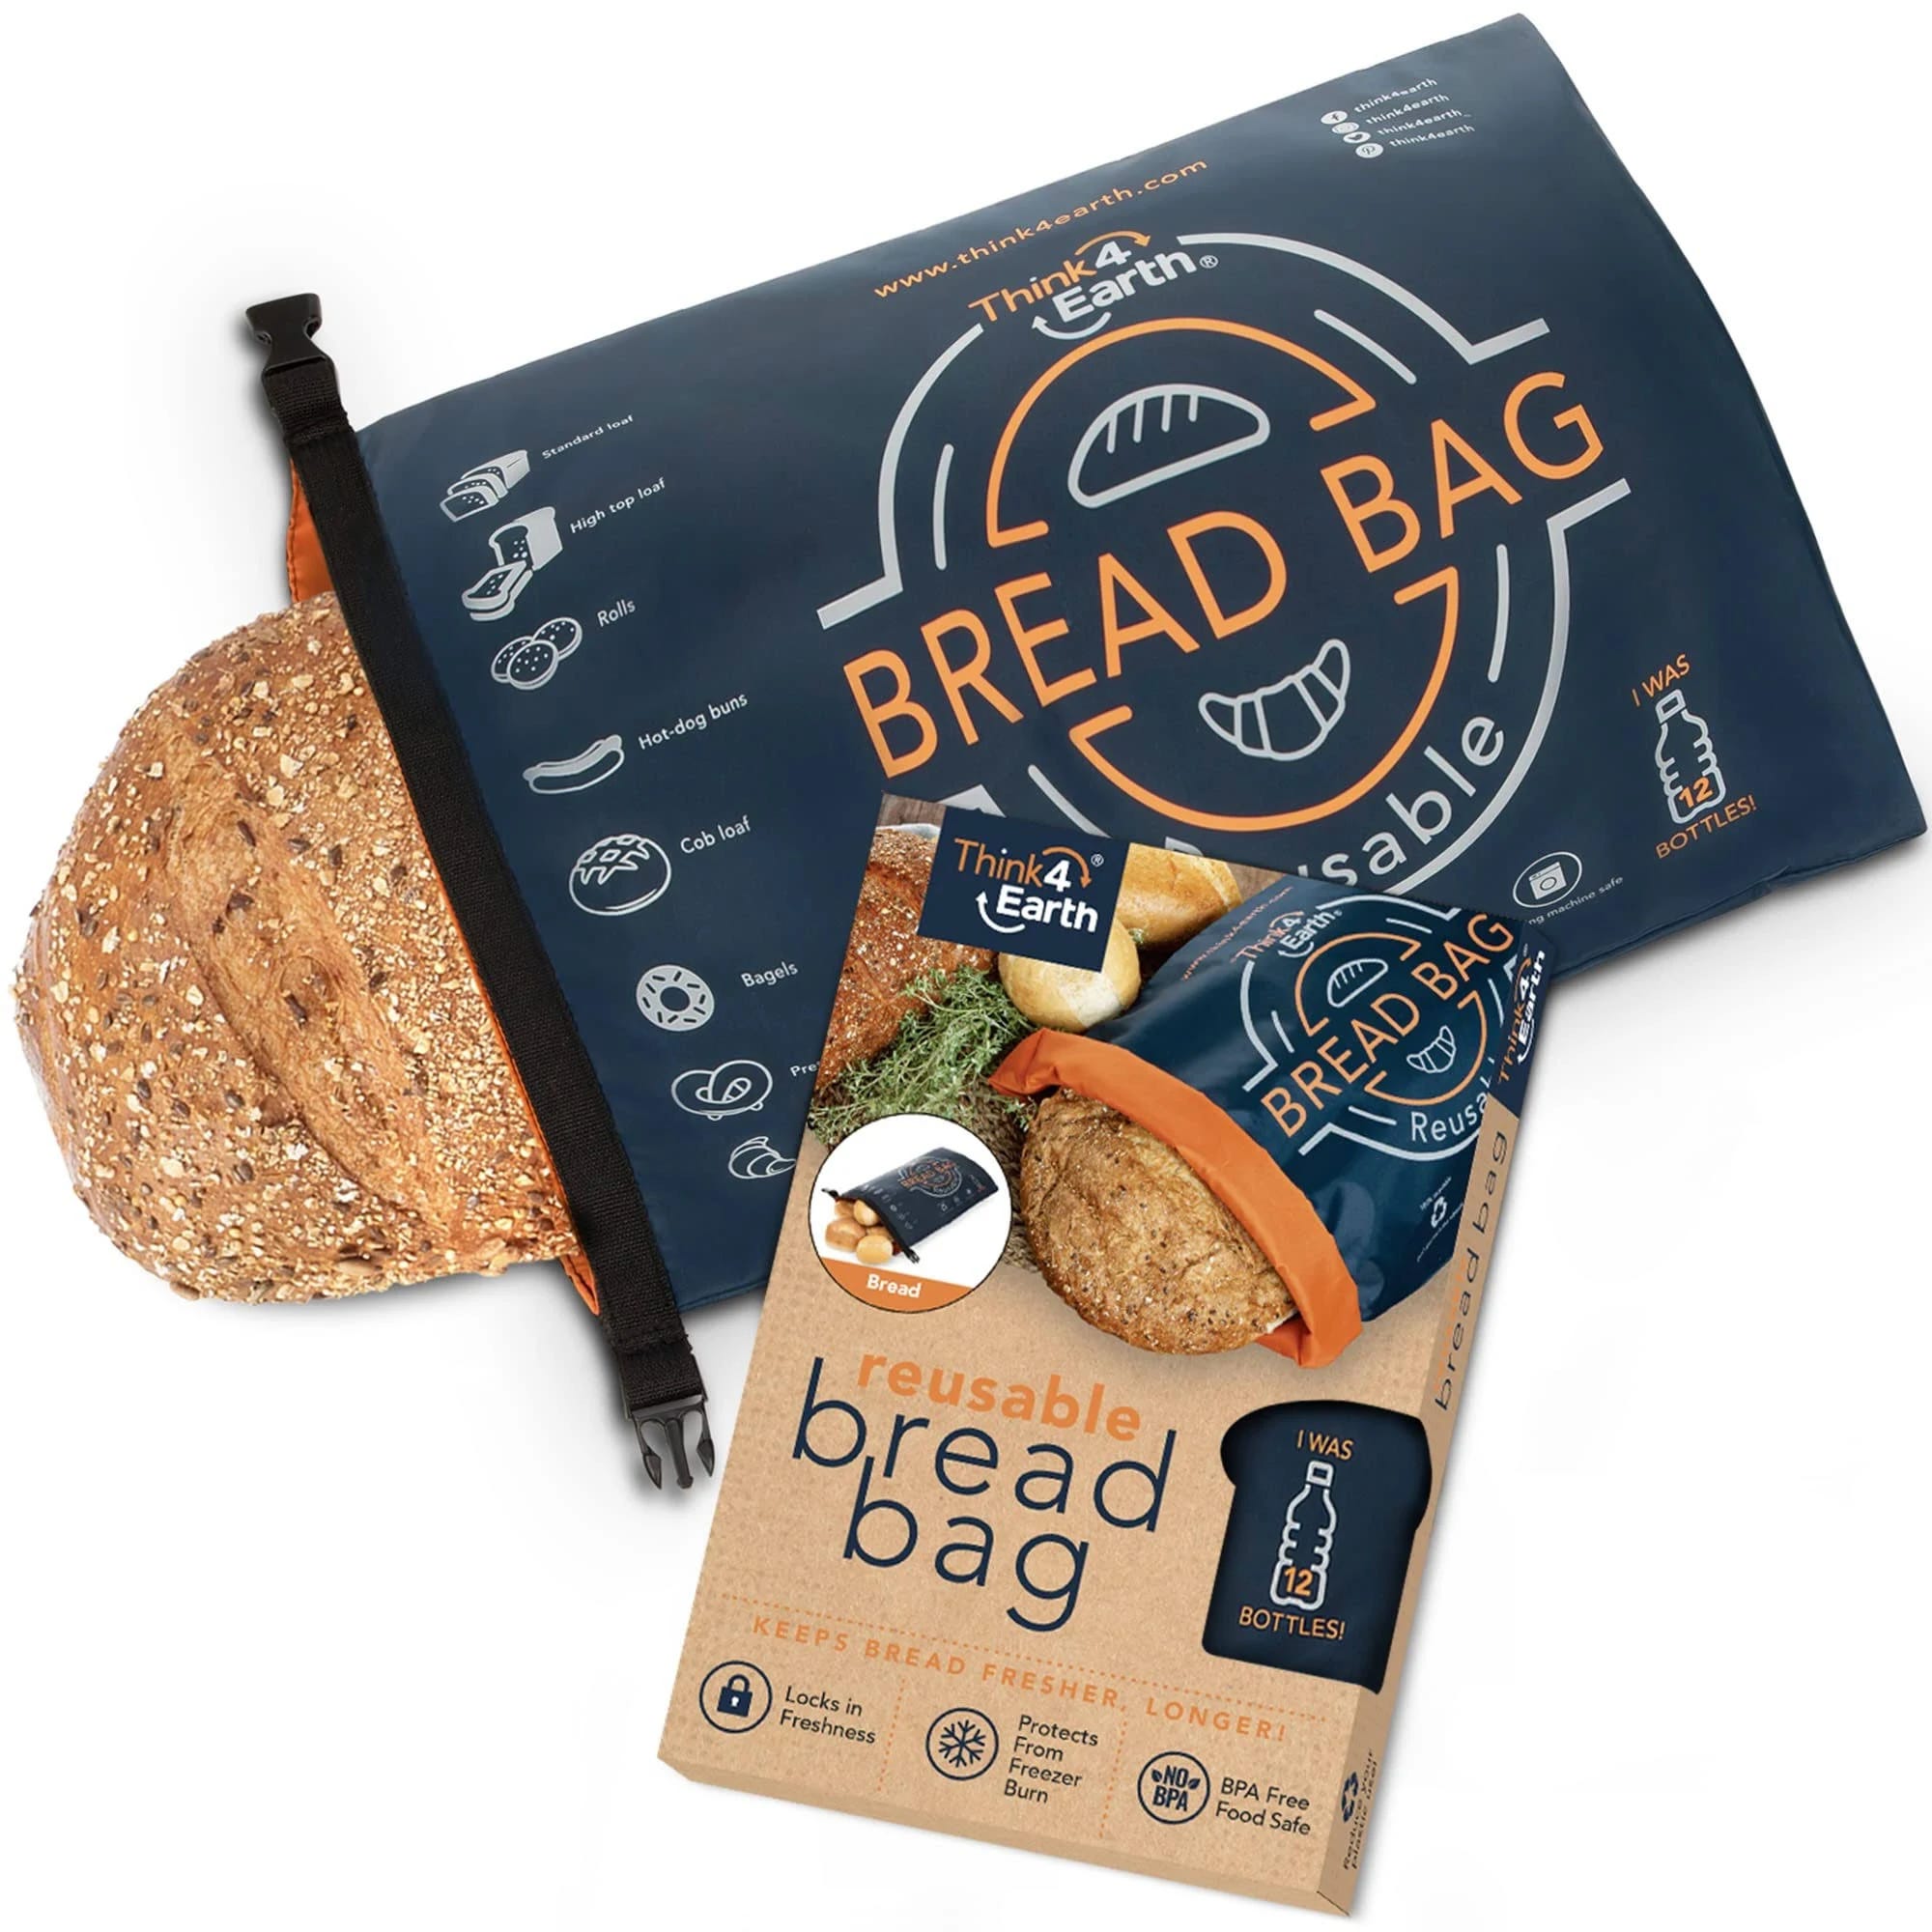 Patent-Pending Reusable Bread Bag for Fresh Storage and Freezer-Friendly Usage | Image